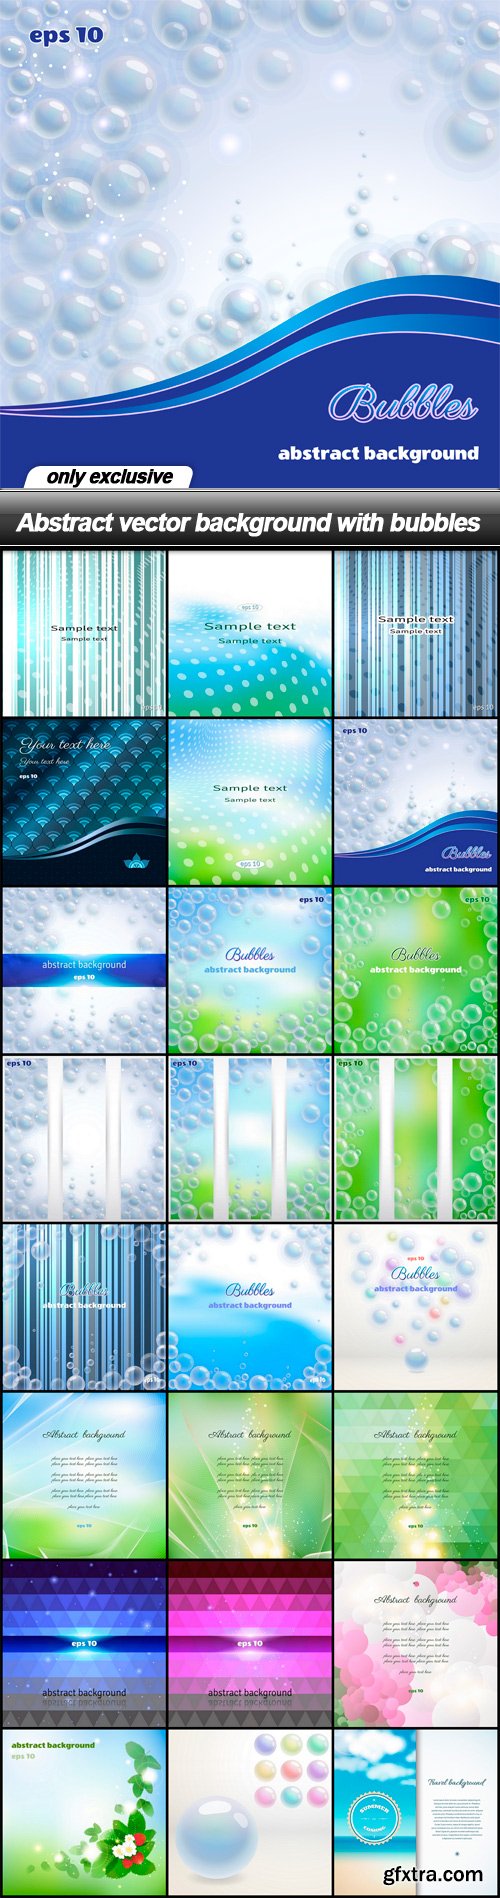 Abstract vector background with bubbles - 24 EPS